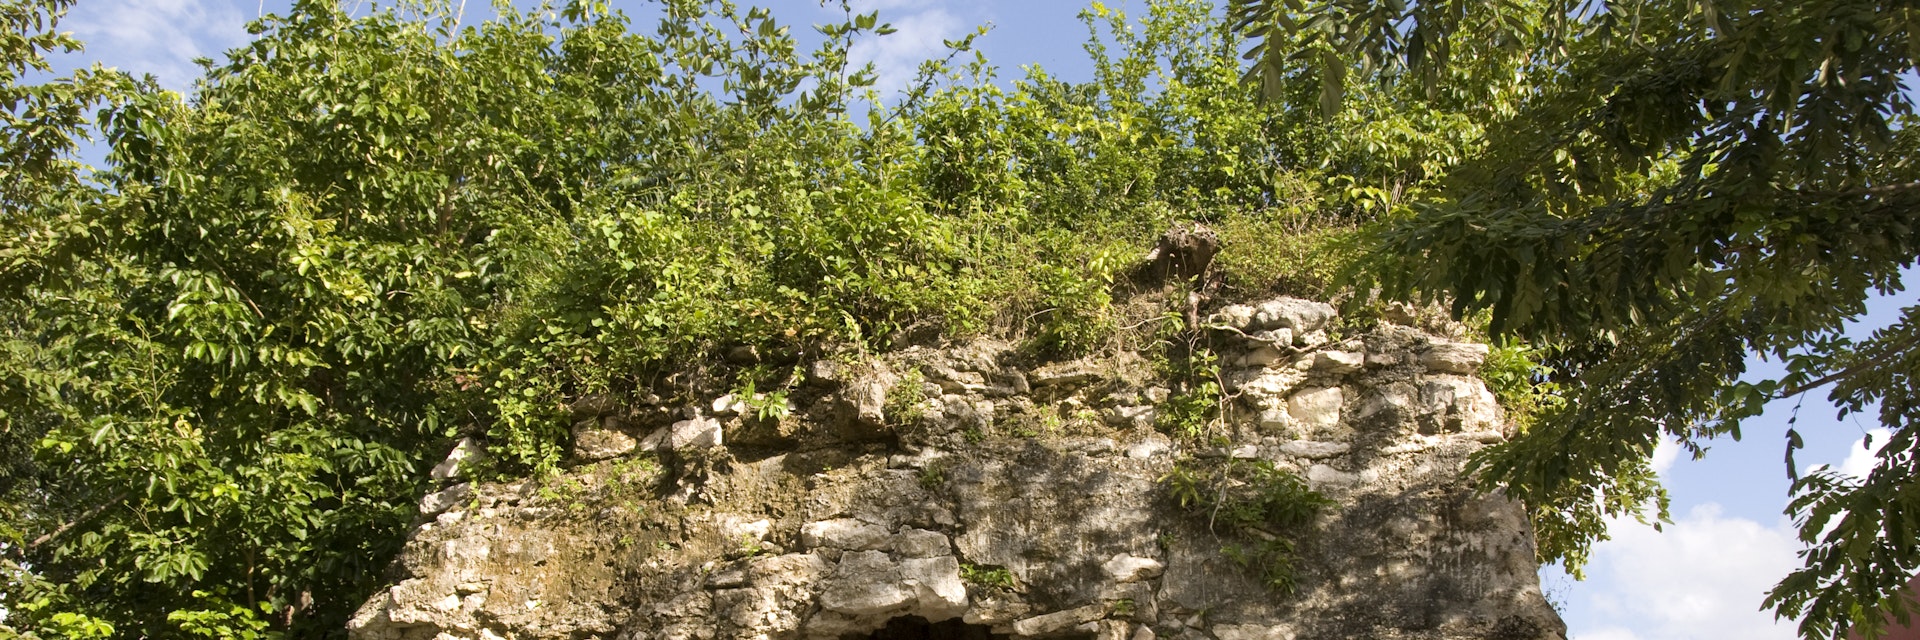 El Cedral Mayan archaeological site, Cozumel